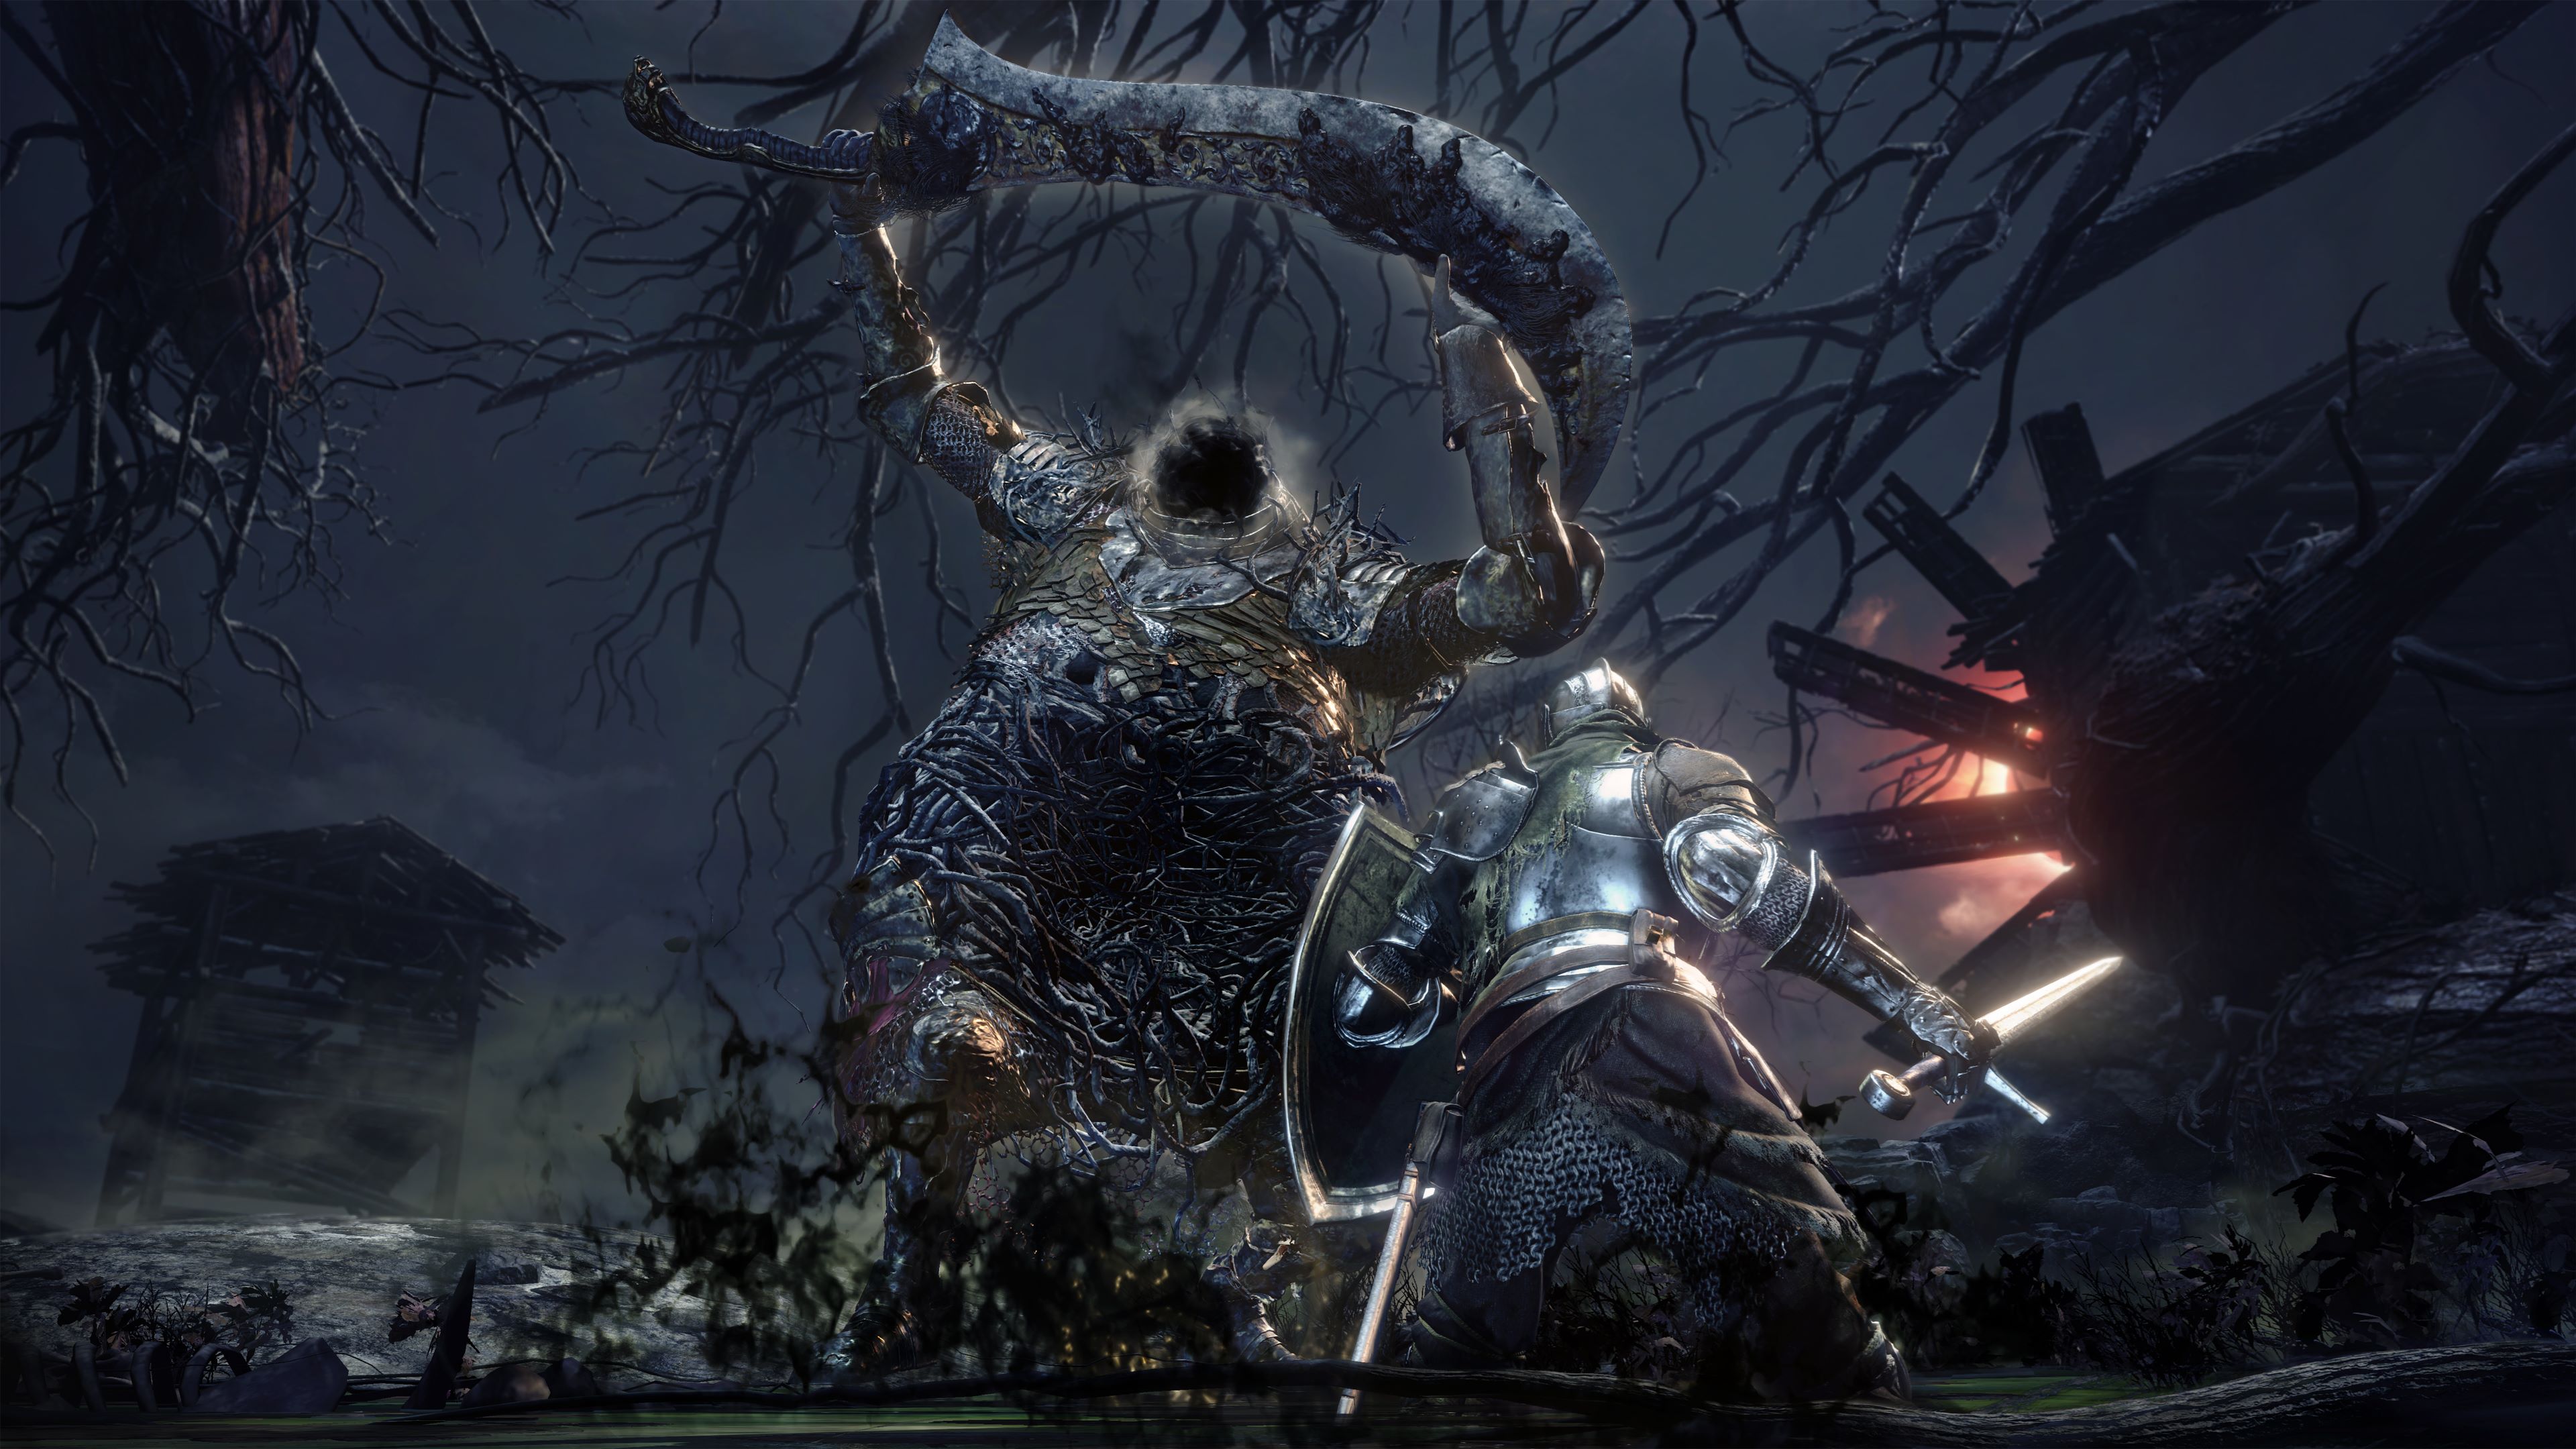 Image for Dark Souls 3 The Ringed City screenshots reveal a lot about DLC's story and how it's connected to the rest of the lore